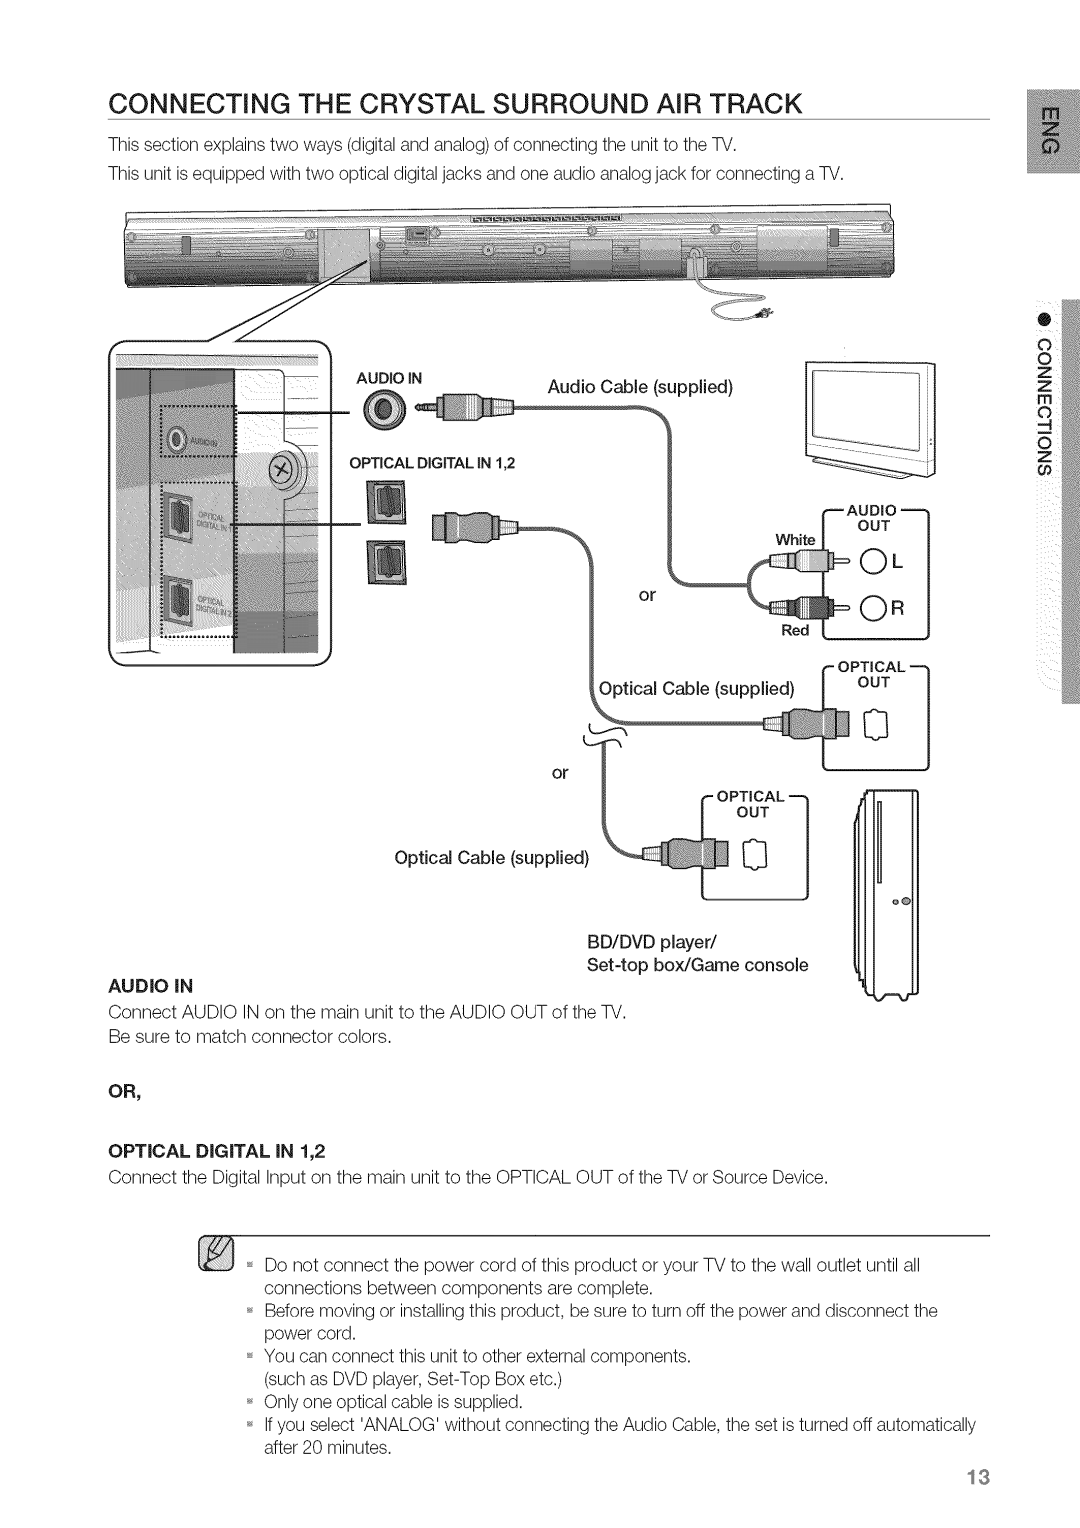 Samsung HW-C450 manual CONNECTING THE CRYSTAL SURROUND AiR TRACK, Audio In 